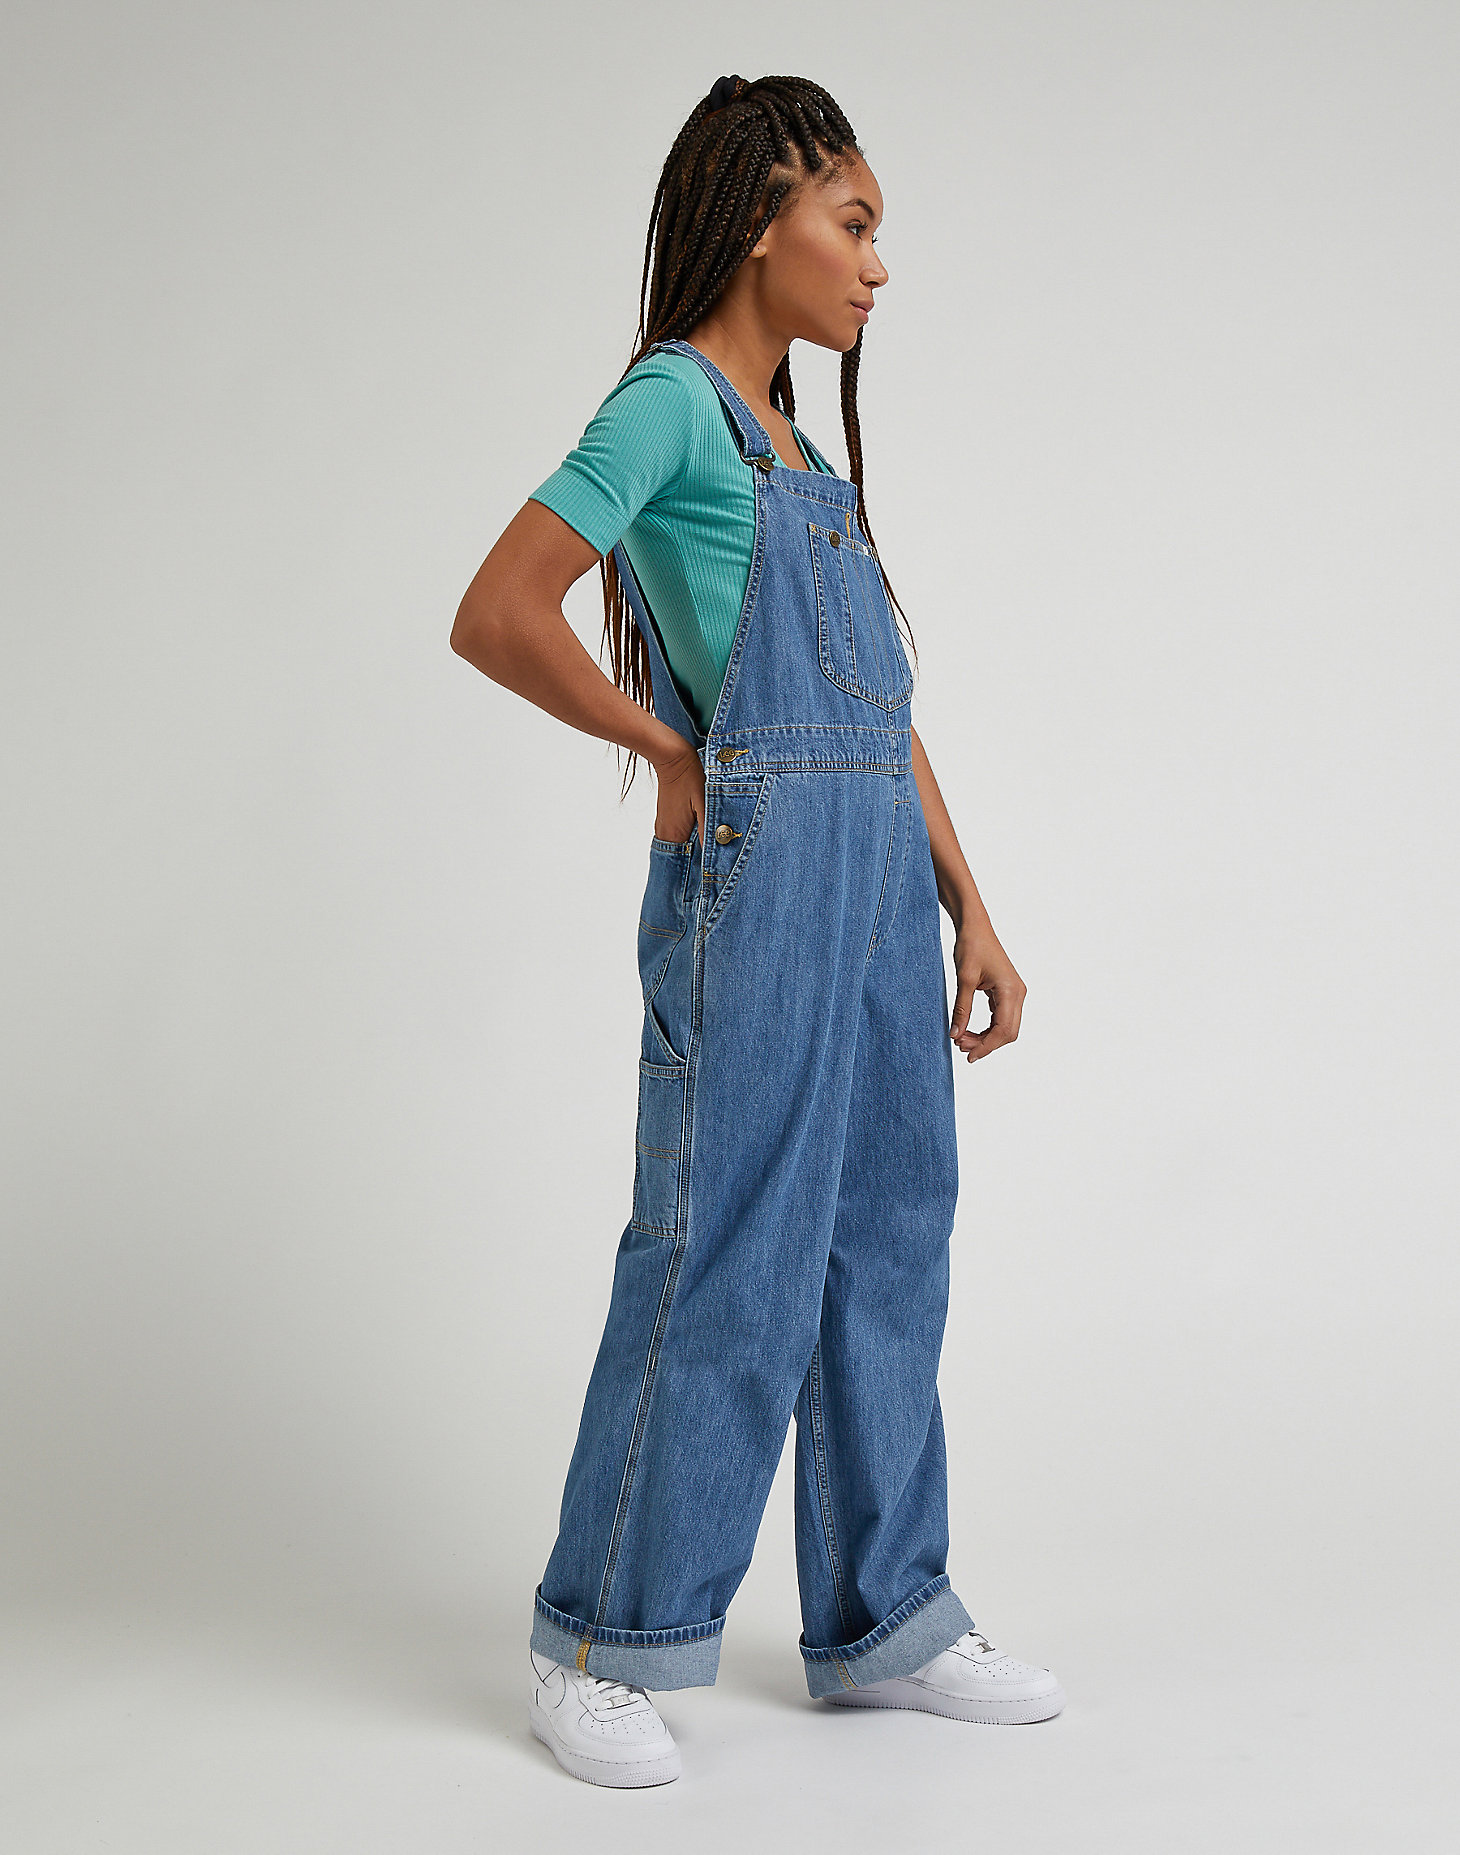 Loose Bib Overall in One Mid alternative view 3